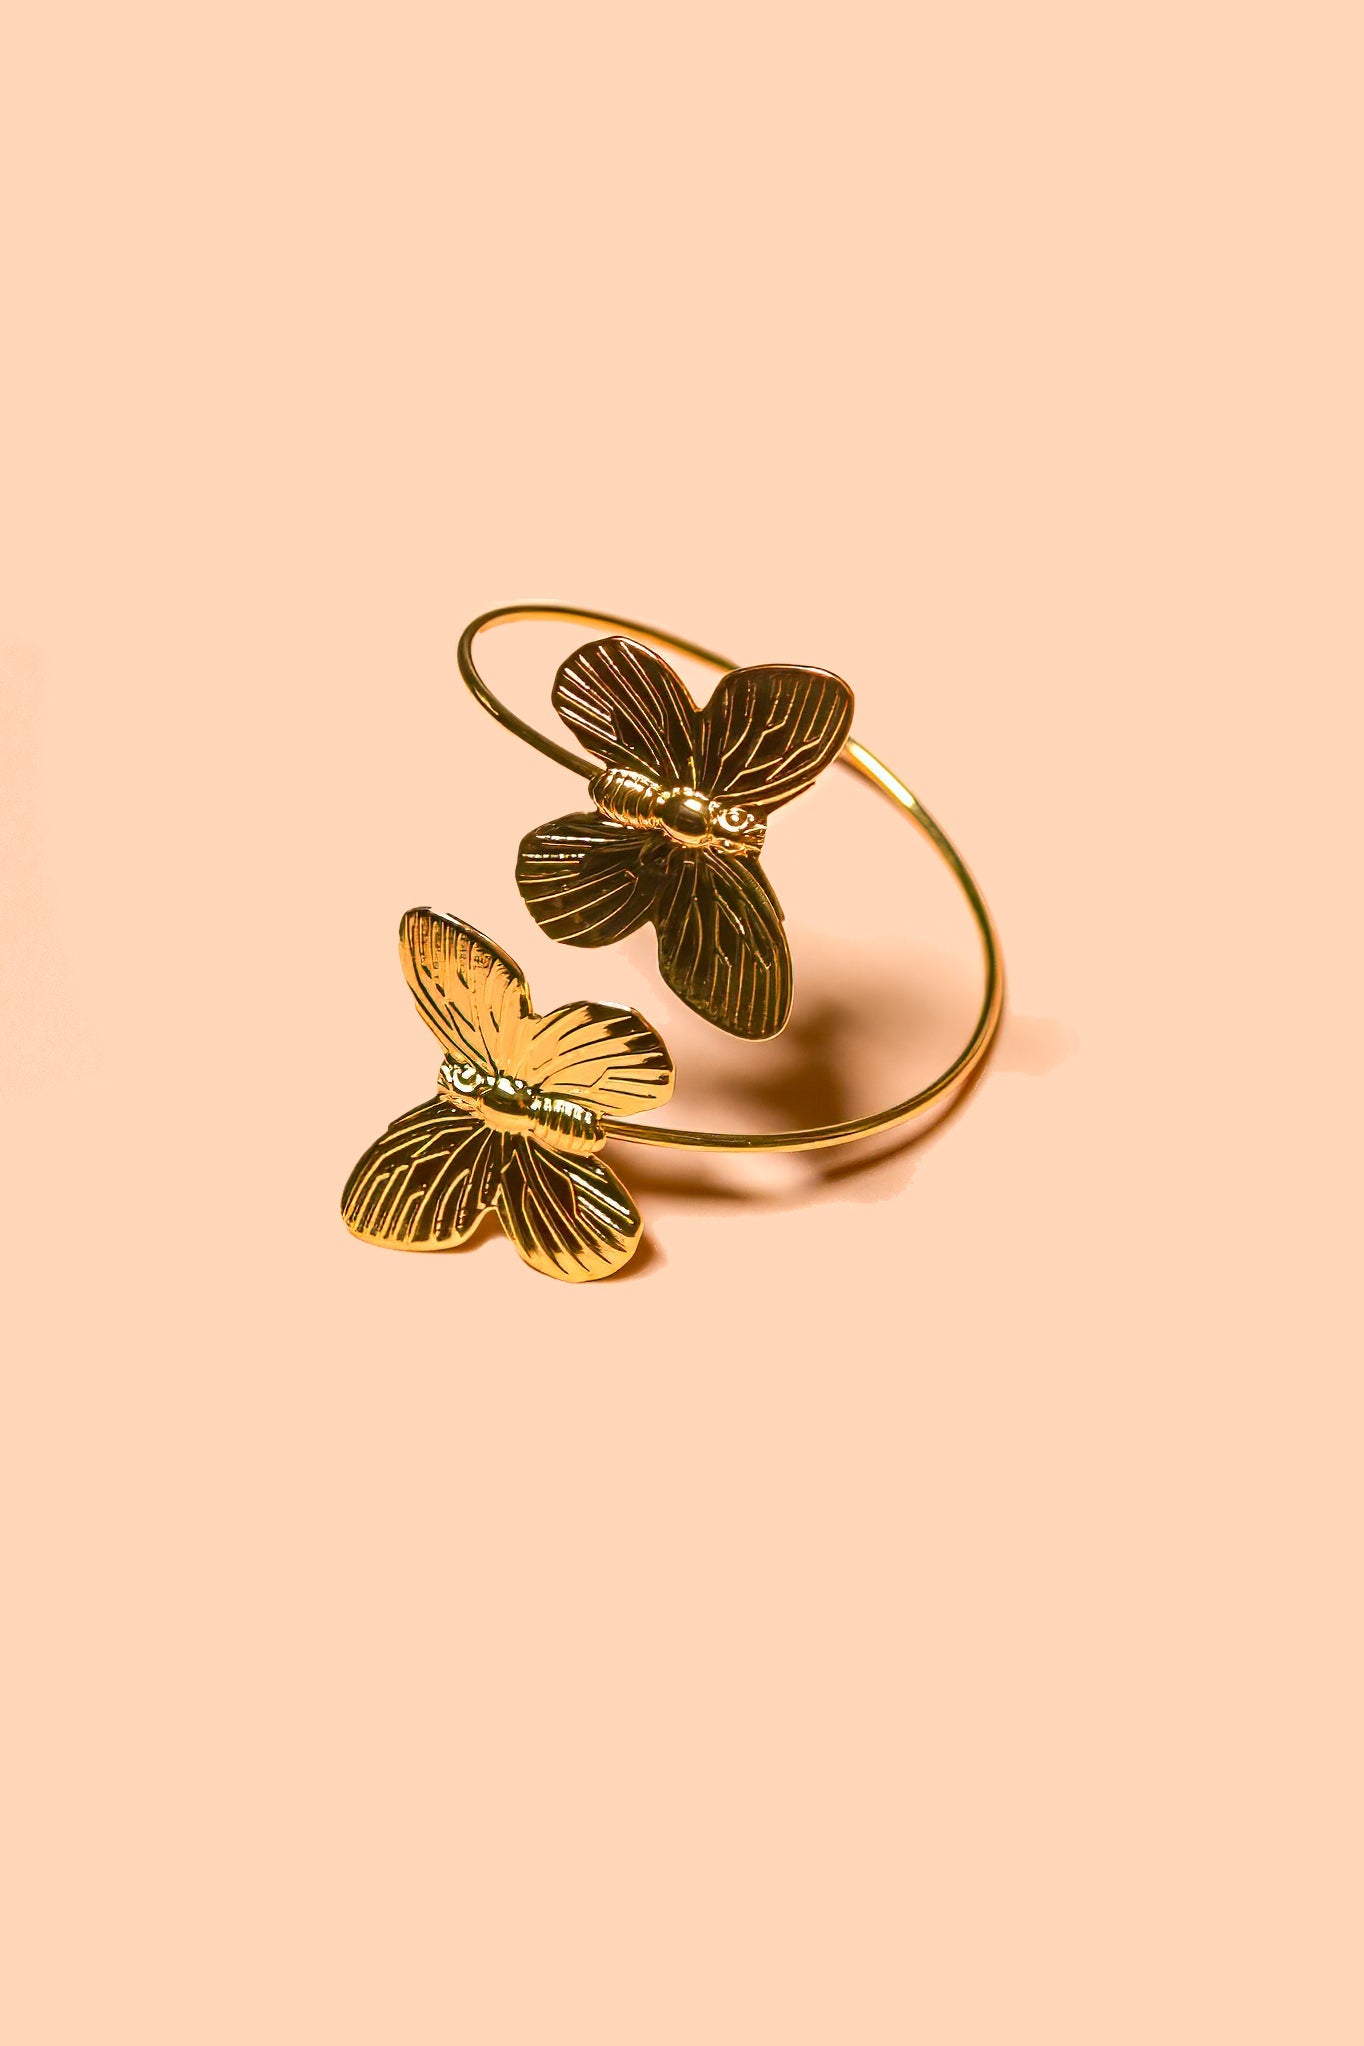 I'll Fly Away Cuff - 18K Gold Plated